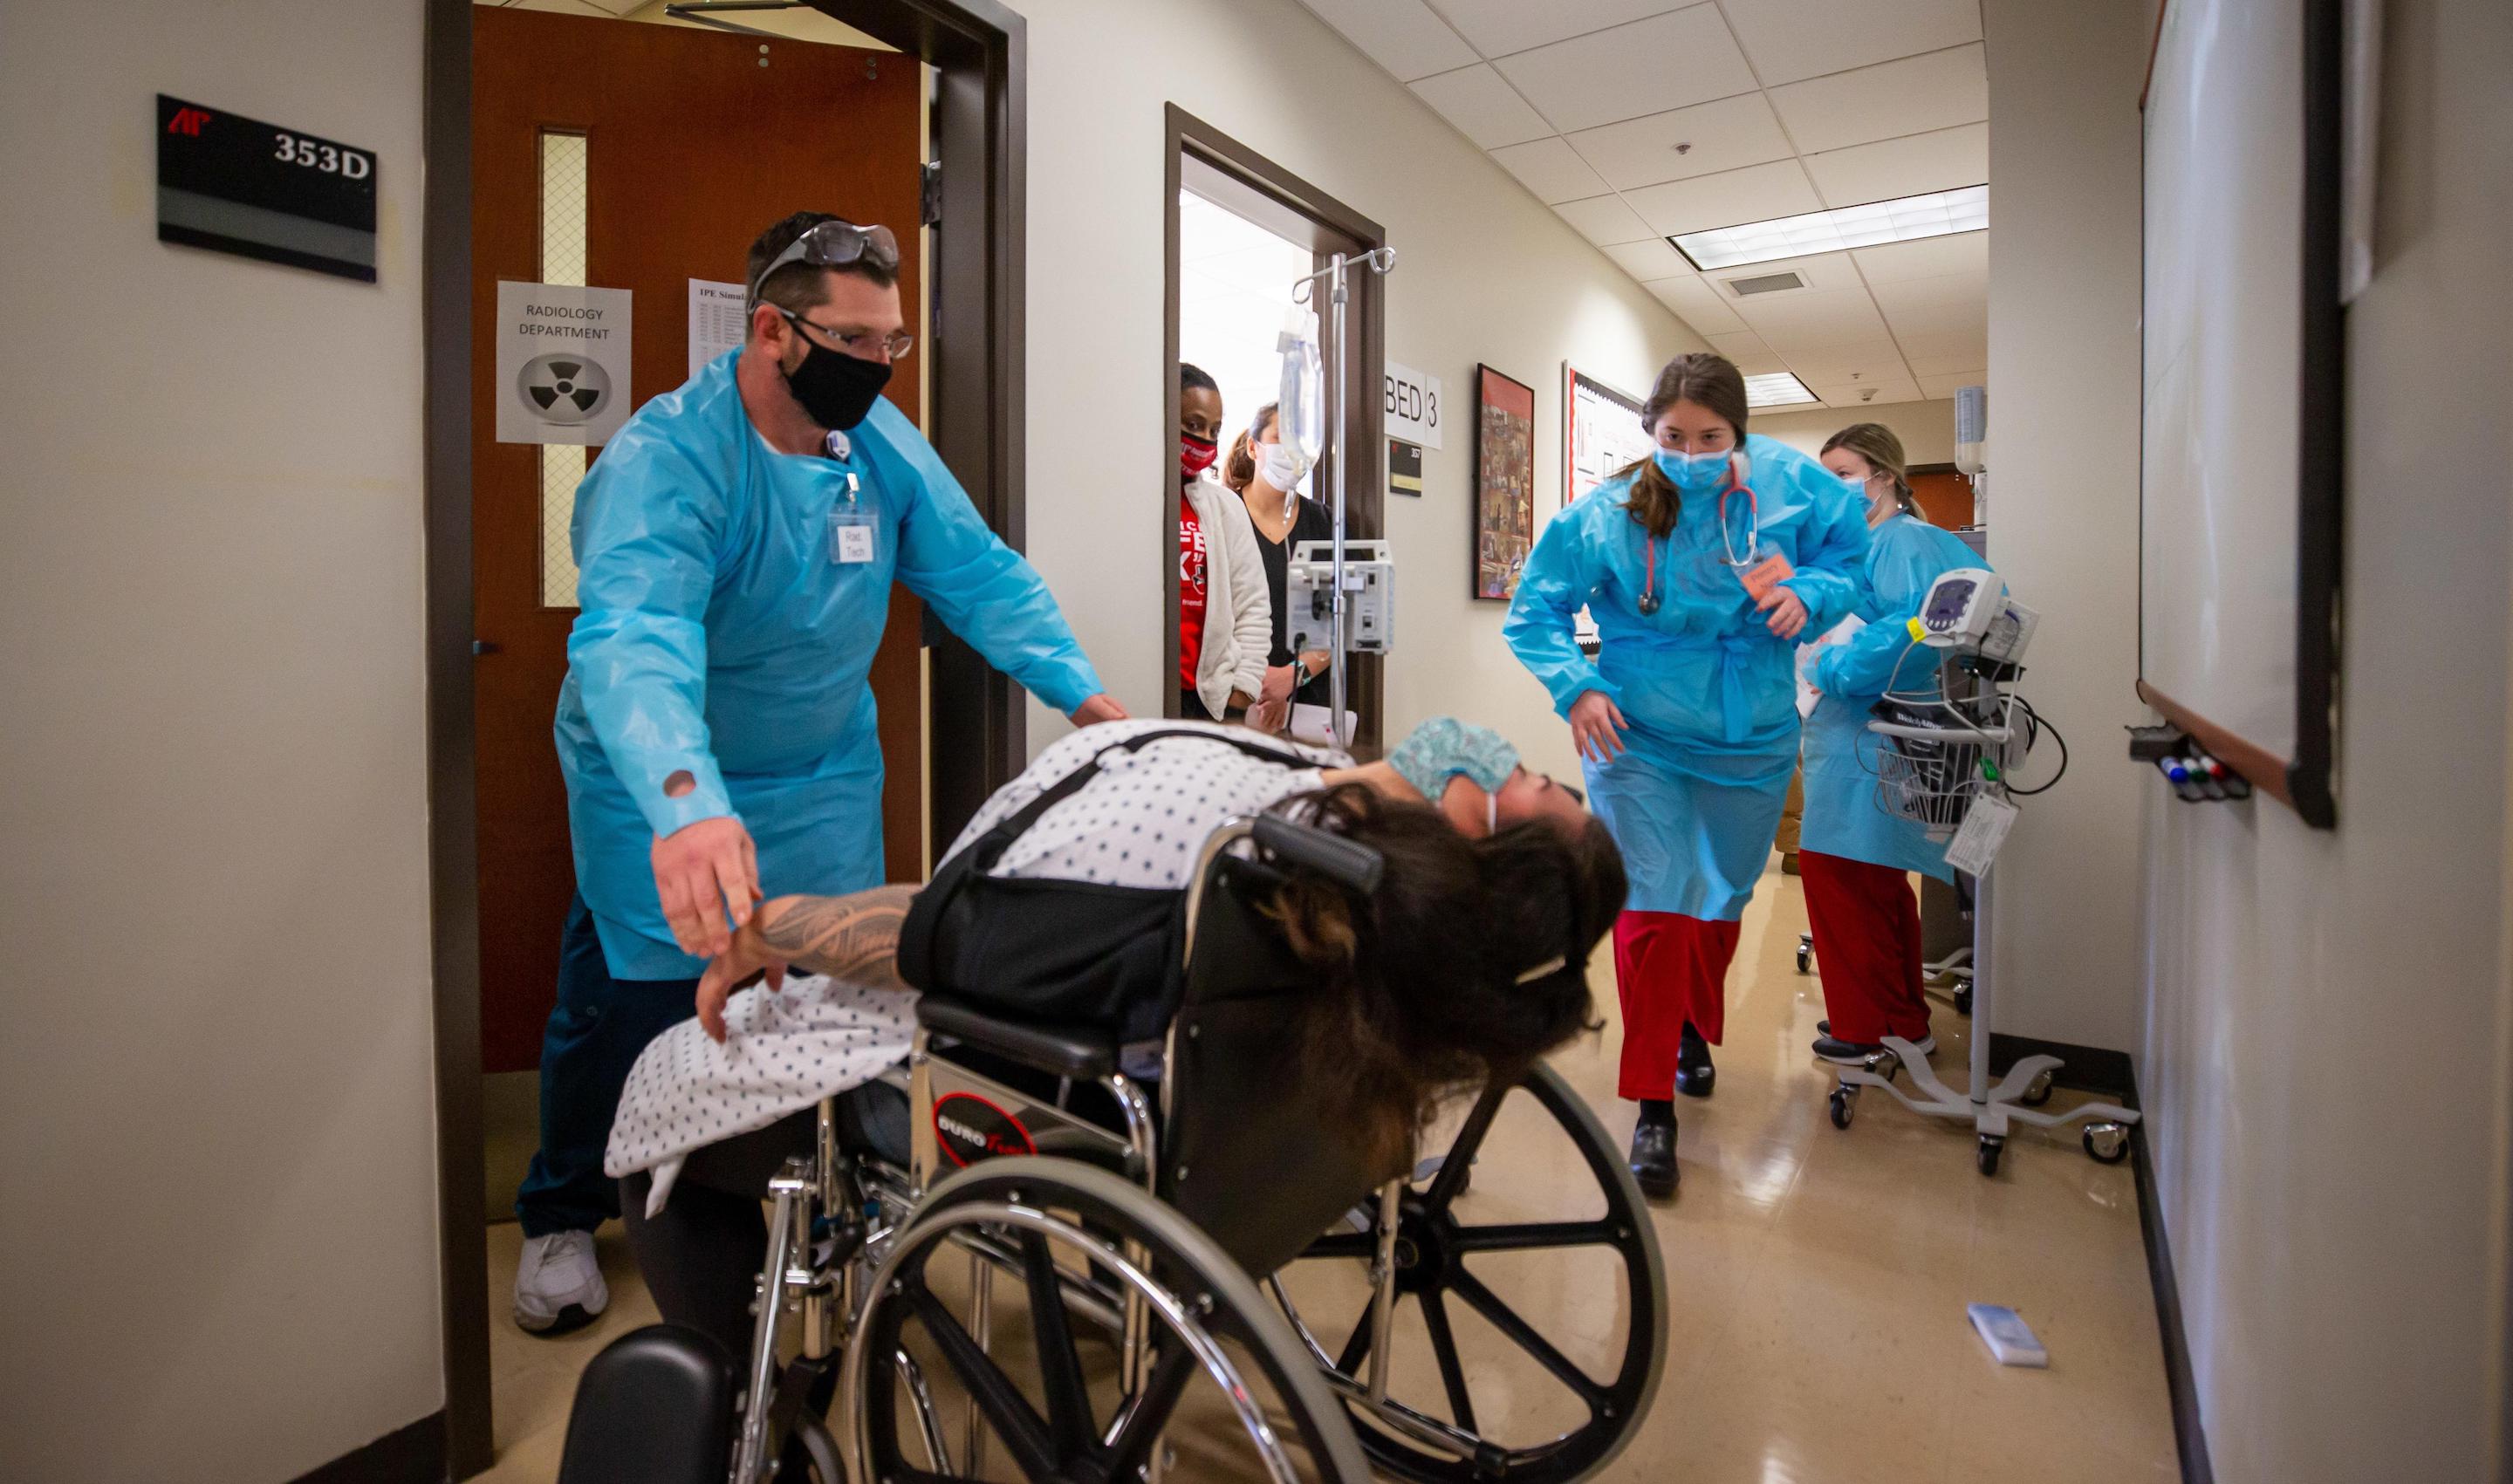 Earlier this month, about 70 Austin Peay State University nursing and radiologic technology students navigated a two-day interdisciplinary simulation where they learned the real-life stakes of collaboration and communication.  The exercise was the first of its kind at Austin Peay, an APSU School of Nursing simulation that brought students from another college – the College of Science, Technology, Engineering and Mathematics – to the school’s simulation lab.  APSU Nursing Simulation Center’s Adrienne Wilk explained the high stakes exercise to the senior-level students before they stepped into the lab.  “Today is for us to improve patient safety and patient outcomes,” she said. “We want you to apply that discipline-specific theoretical knowledge that we’ve lectured to you over the last several months. We want you to apply that knowledge in a real-life clinical setting.”  The objectives of the simulation included understanding the roles each discipline has in a medical setting while collaborating and communicating effectively to improve patient outcomes.  “You have to learn how to communicate,” said Jennifer Thompson, program director for radiography at Austin Peay. “That is one of the biggest takeaways from these scenarios is the students realizing, ‘I had no idea how to talk to the nurses.’  “We need to know how to ask how to help the nurse, and the nurse needs to know how to ask what they can do for you so that you become a healthcare team, not just a rad tech and a nurse,” Thompson added.  Faculty have planned a second interdisciplinary simulation for about 80 junior-level nursing and rad tech students in early April.  Students navigate COVID-19, seizure during simulation  The students separated into teams of two or three nursing students and a rad tech student then rotated among four stations covering two scenarios.  During the March 3-4 exercise, the students cared for a COVID-19 patient and a patient who had fallen and injured her shoulder during a seizure.  Each scenario mimicked real-life settings and included full patient charts and physician orders. Both patients, for example, had doctor’s orders for medical imaging.  In both scenarios, the nursing and rad tech students had to navigate each discipline’s roles while communicating clearly.  The students, for example, had to prepare the COVID-19 patient – played by a high-tech manikin with vital signs – for his diagnostic imaging. The students had to figure out how to position the manikin while keeping him comfortable and the health monitoring equipment secured and working.  A fellow rad tech student volunteered to play the patient in the other scenario and surprised the students with a seizure during medical imaging.  The students gathered with their instructors after each scenario to discuss where they succeeded and where they could improve.  “That’s where all the learning happens,” Wilk said, “especially for visual learners to see the whole patient scenario laid out.”  Thompson agreed: “You don’t realize how much is happening during the simulation until you watch the debriefing.”  ‘We need them to help with the patient’  Nursing senior Daketra Mason’s biggest takeaway centered on communication, especially between disciplines across campus. The School of Nursing is in the College of Behavioral and Health Sciences, and the rad tech program is in CoSTEM’s Department of Allied Health Sciences.  “Throughout the whole sim, I saw how important it is communicating with everybody, with other healthcare workers and the patient,” she said.  Rad tech senior Valerie Picataggio joined Mason and nursing senior Hannah McElroy in the scenario.  “In a real setting, (Valerie) wouldn’t have known what we knew about the patient so we would have had to explain to her what was happening,” Mason said.  The COVID-19 patient in the simulation, for example, had a pressure sore that restricted his movement.  “And from my perspective, I’m used to getting in and getting out, but I could put that patient’s safety at risk because I didn’t know about his pressure sore,” Picataggio said. “For the most part, we stay out of the nurses’ way, get the image and then leave.”  McElroy said the simulation allowed her to recognize the need to collaborate.  “We do work pretty closely with (rad tech),” she said. “They don’t need to stay out of the way, they’re not in the way, we need them to help with the patient as well.”  Picataggio also noted the importance of including a COVID-19 patient in the scenario.  “You don’t treat COVID patients differently just because they’re vented,” she said. “As long as we’re protecting ourselves and being smart, they shouldn’t feel any kind of aversion to them.  “That could be my family member lying there.”  To learn more  • For more about the Department of Allied Health Sciences, visit www.apsu.edu/allied-health/. • For more about the School of Nursing, go to www.apsu.edu/nursing/.